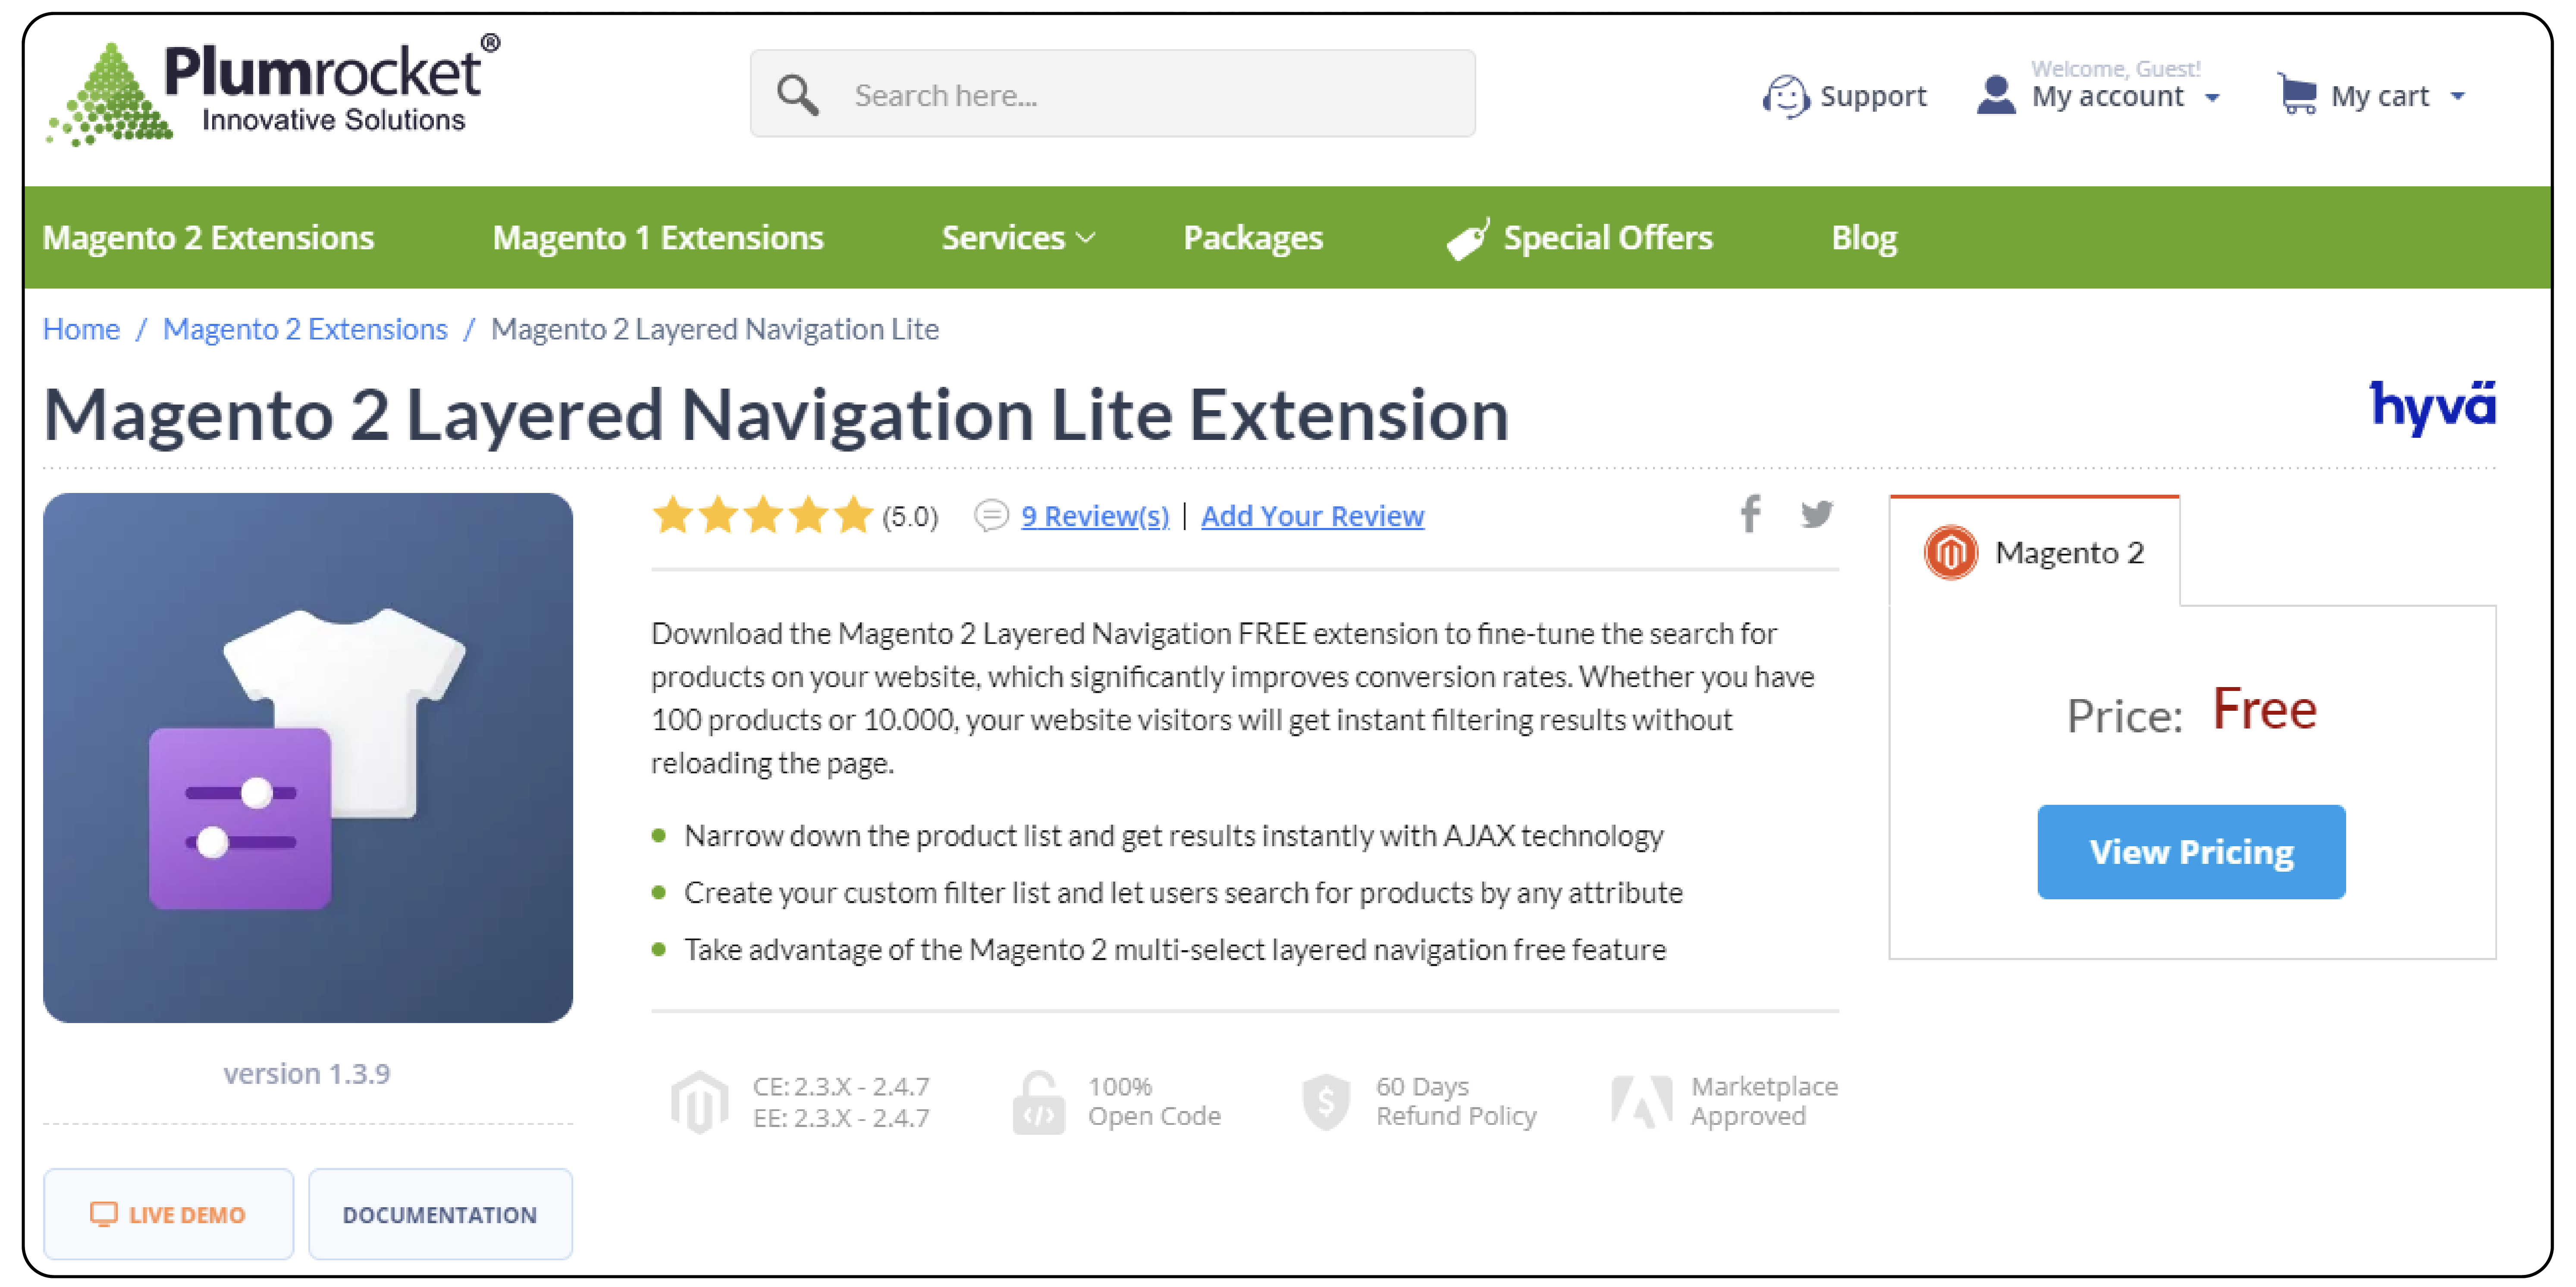 Magento 2 Layered Navigation Lite Extension by Plumrocket